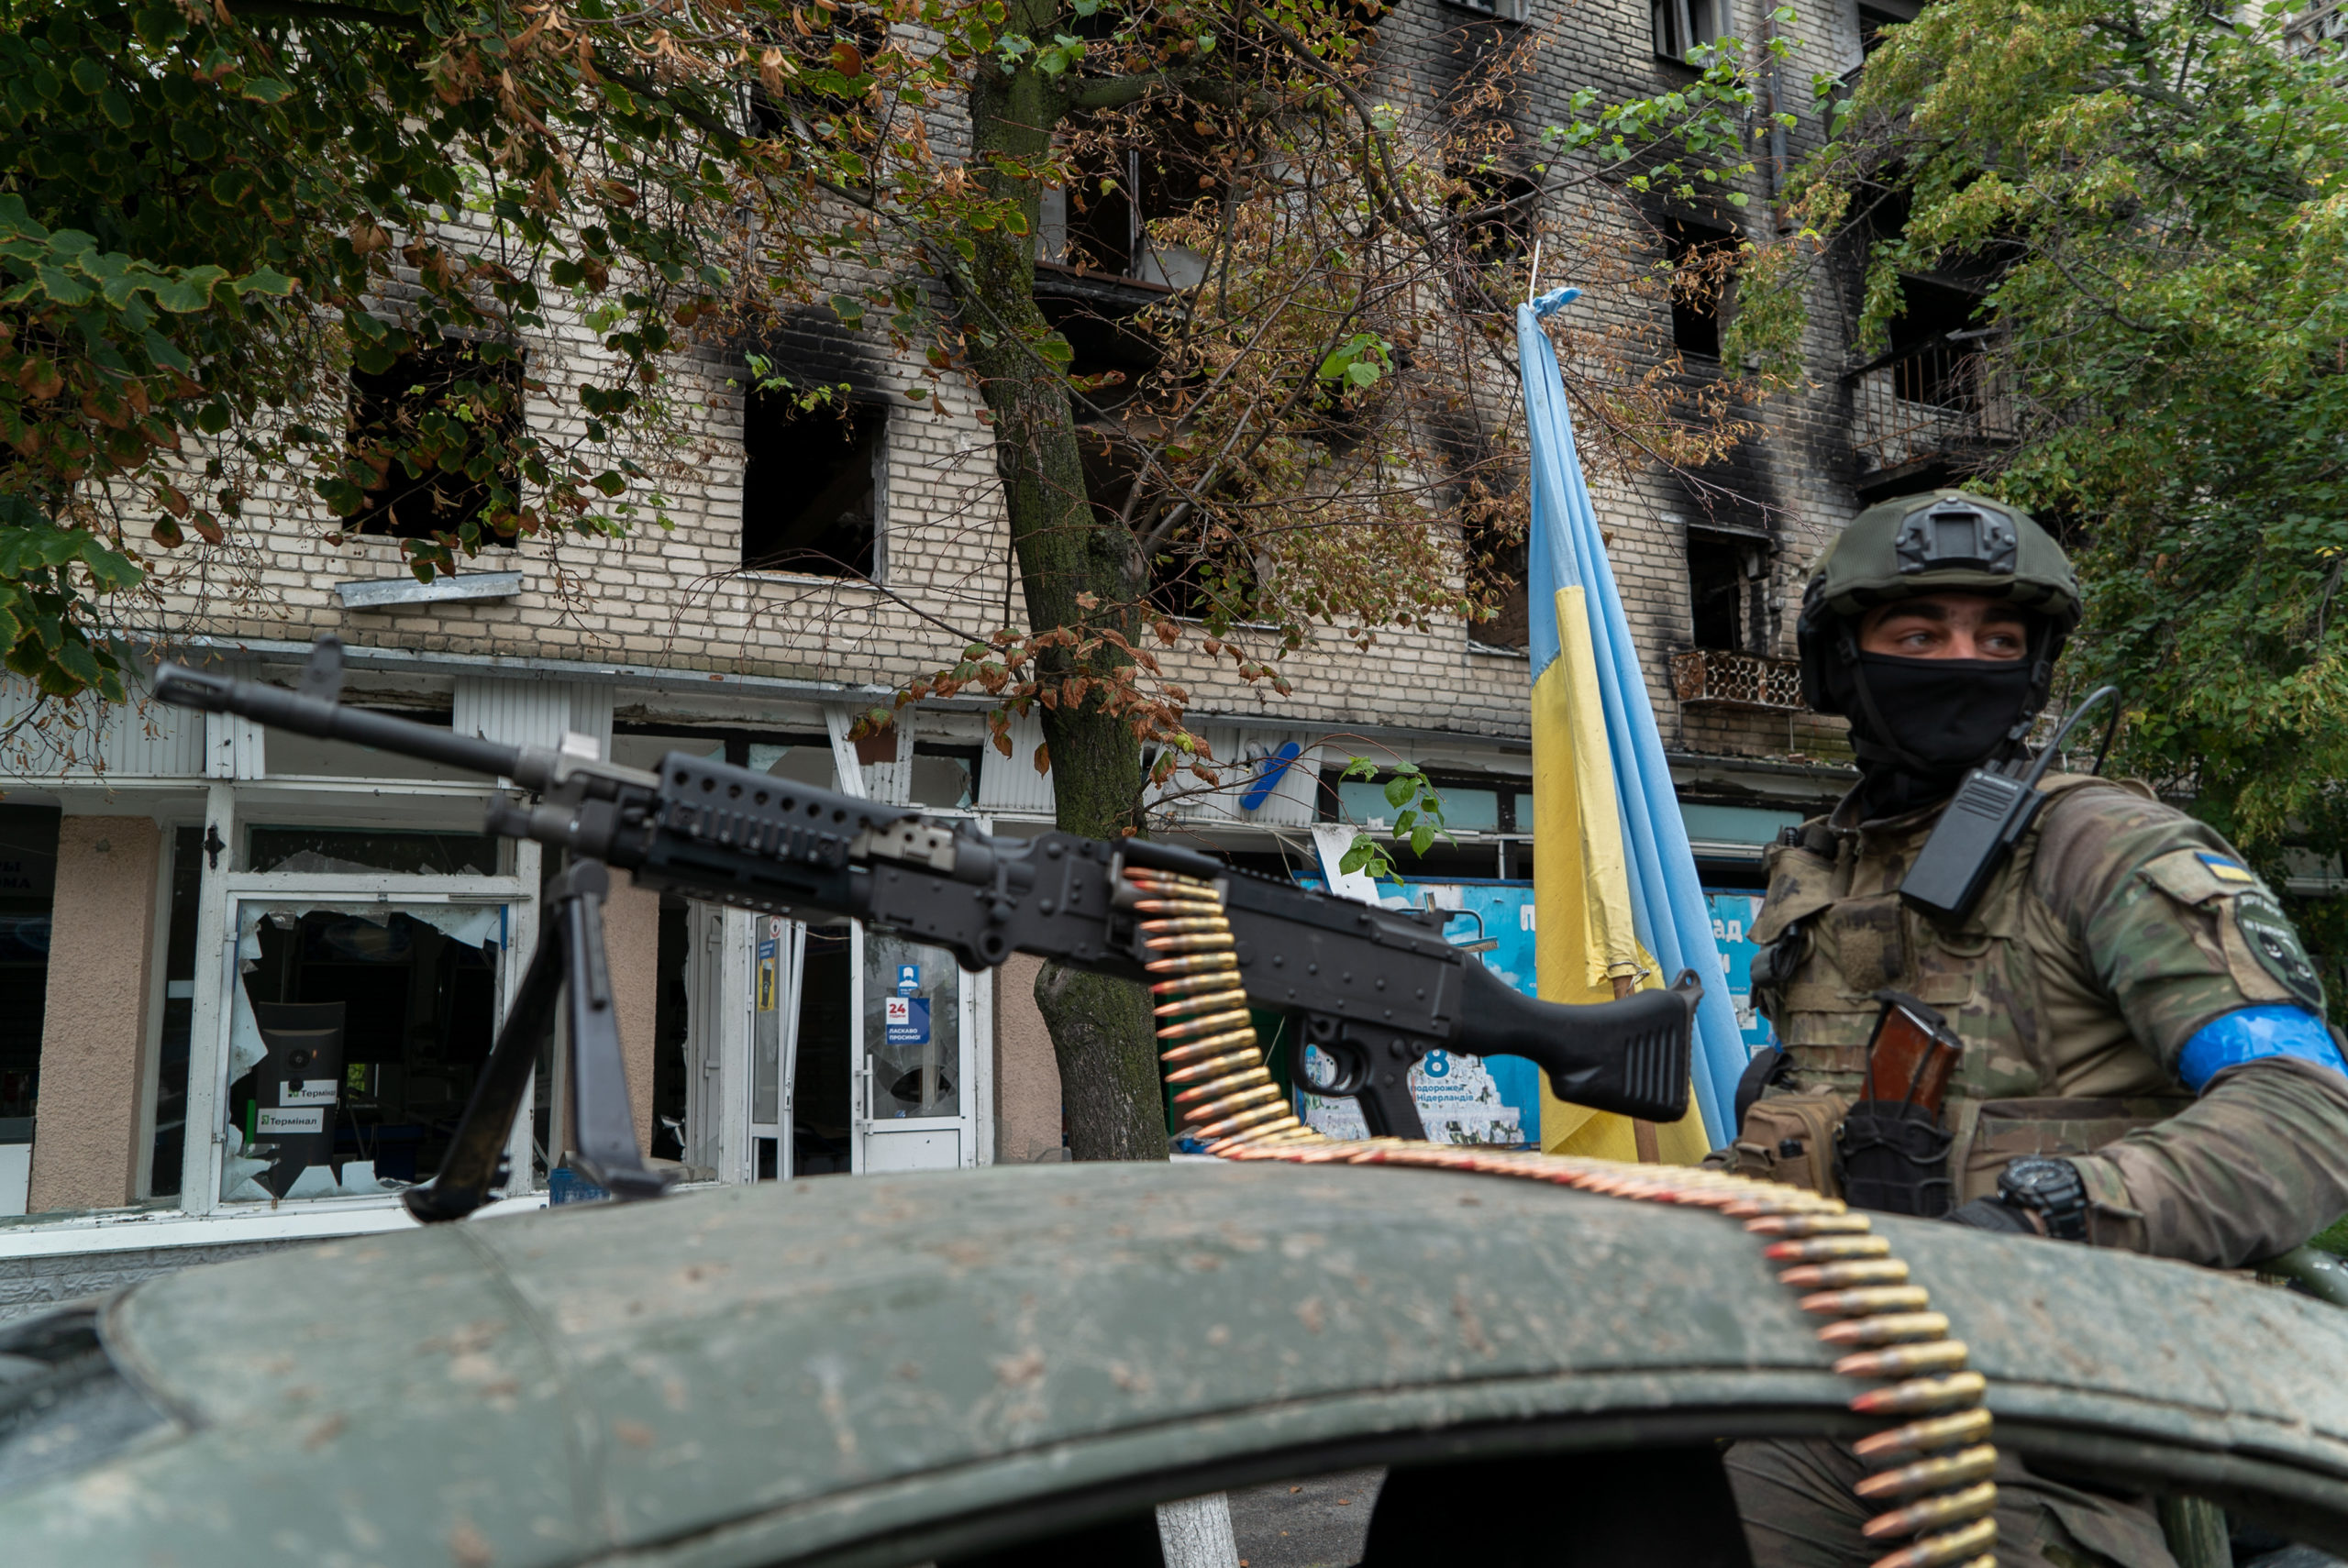 Pro-Ukraine Hacktivists Claim to Have Hacked Notorious Russian Mercenary Group